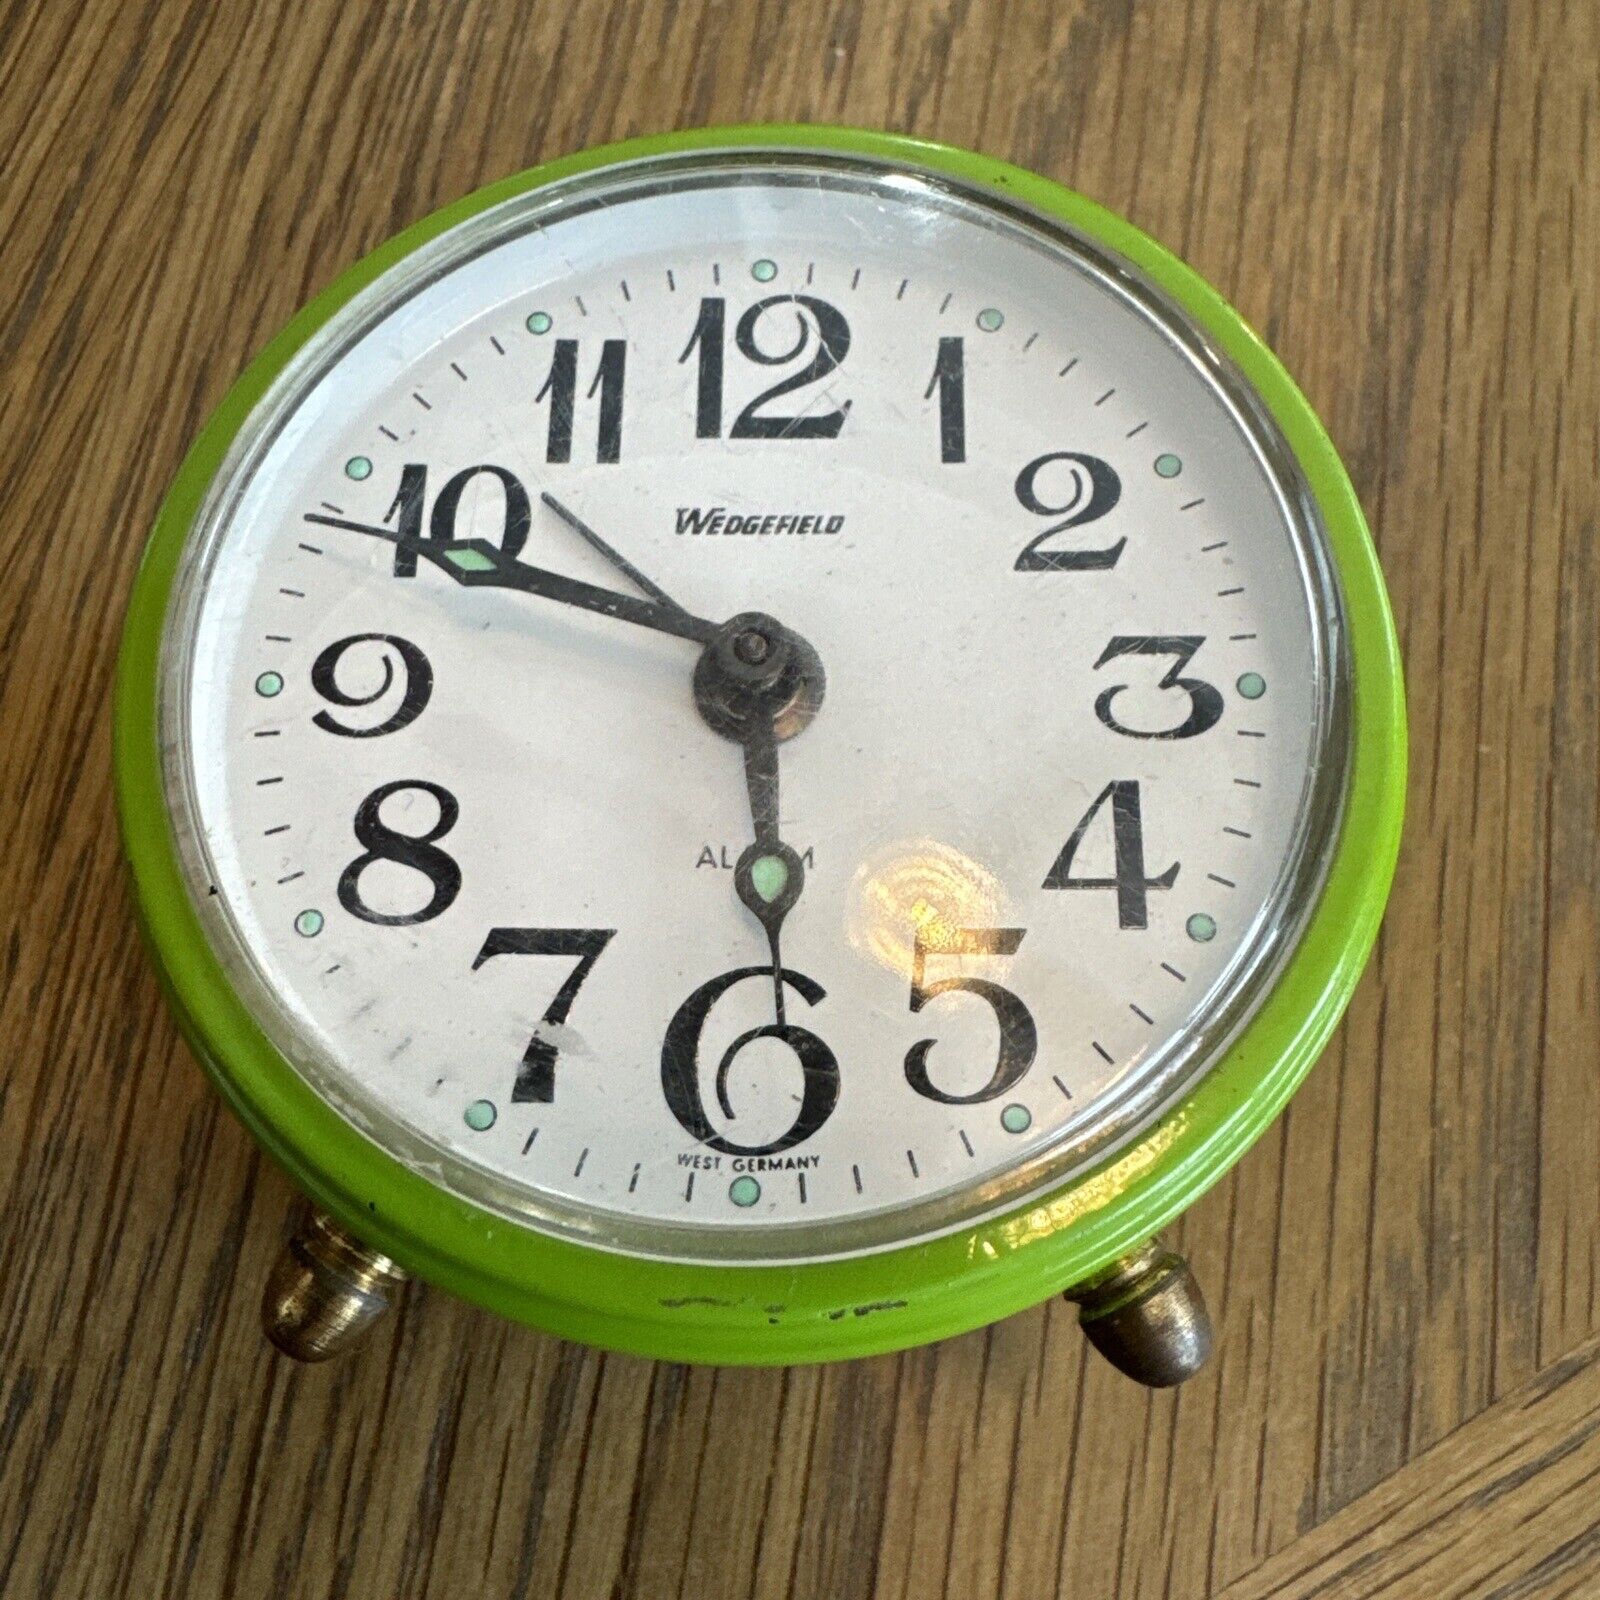 Wedgefield Vintage Wind Up Alarm Clock Green Tested Works West Germany Brass